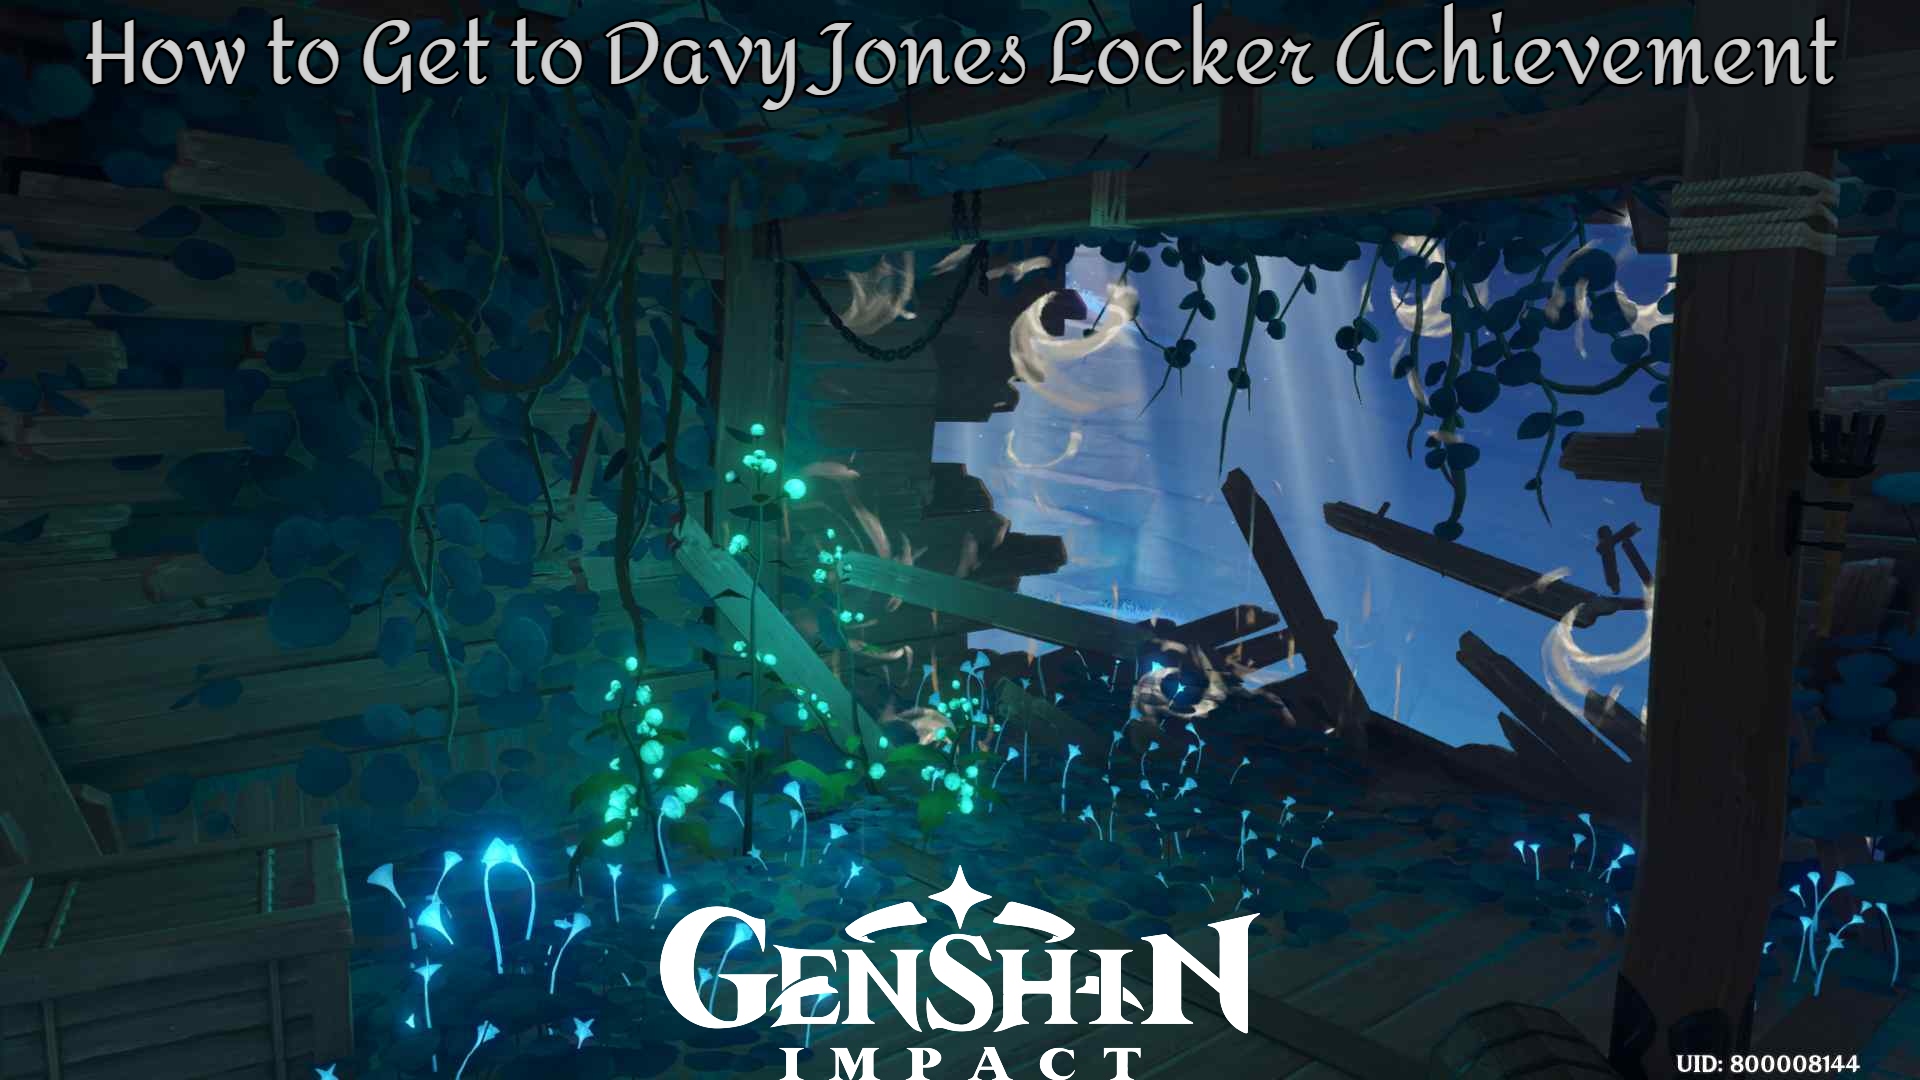 You are currently viewing Genshin Impact: How to get to Davy Jones Locker Achievement